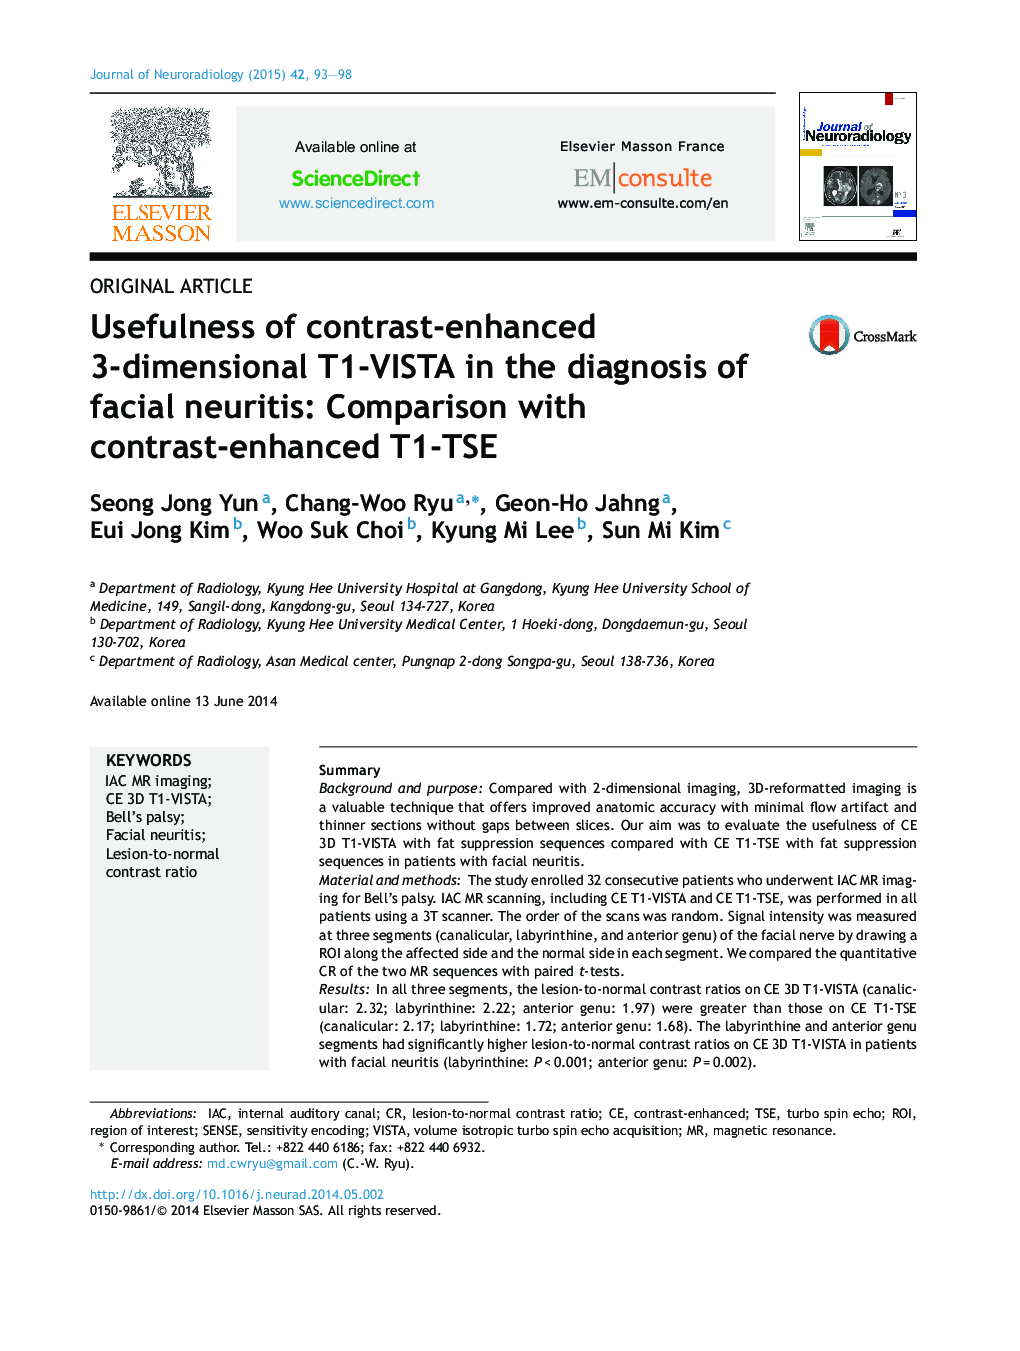 Usefulness of contrast-enhanced 3-dimensional T1-VISTA in the diagnosis of facial neuritis: Comparison with contrast-enhanced T1-TSE